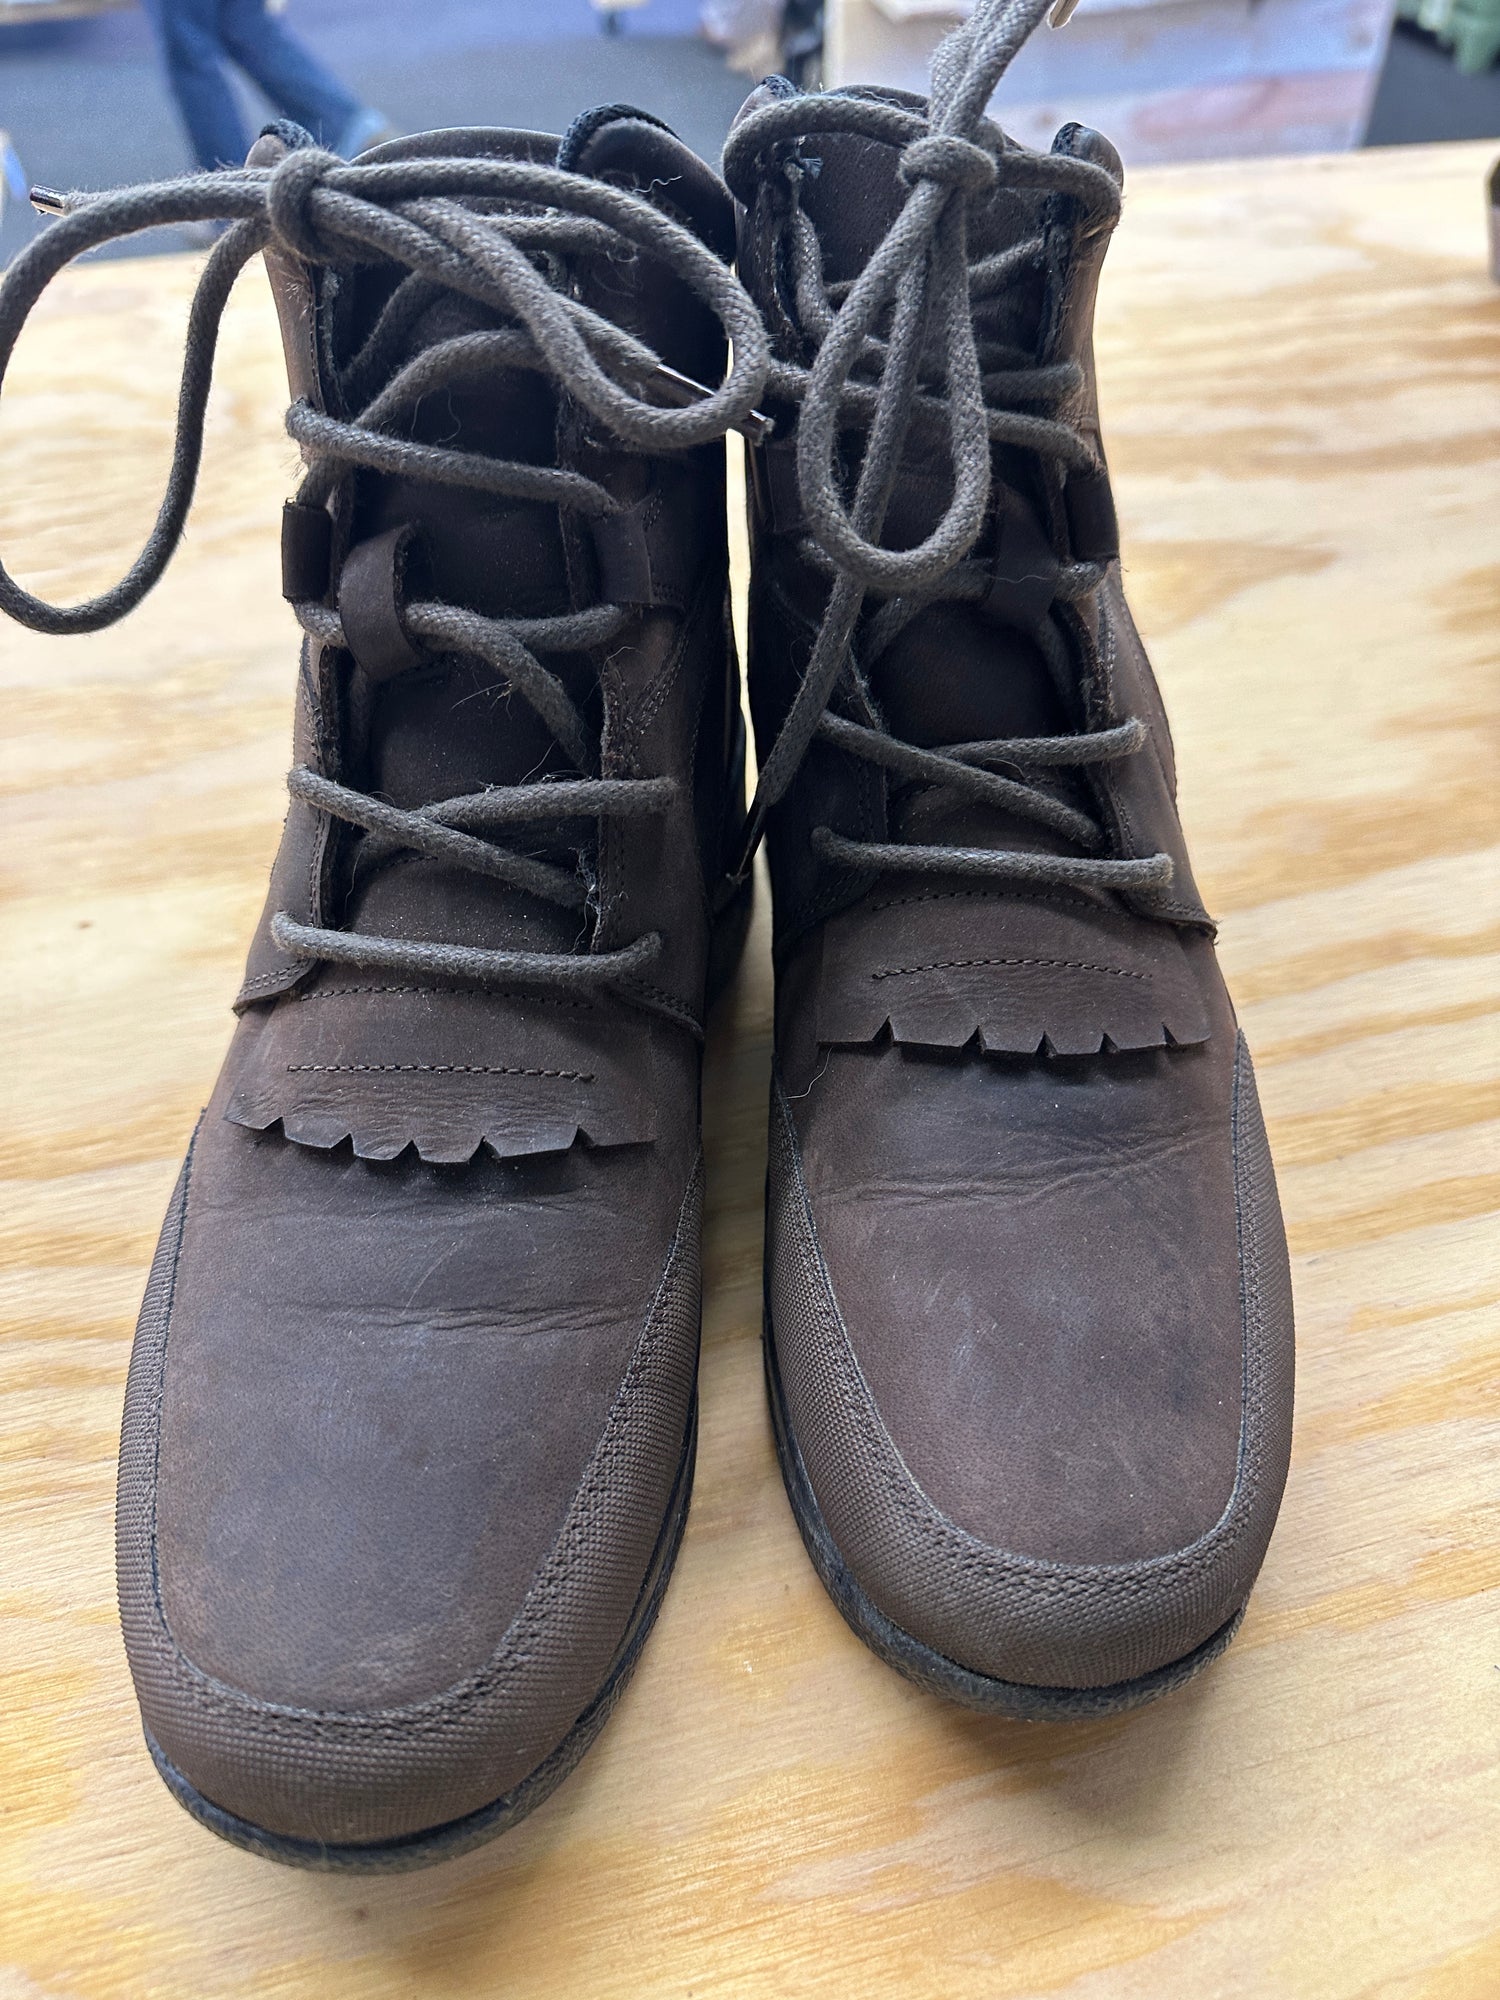 Women's Paddock Boots Size 7 Brown